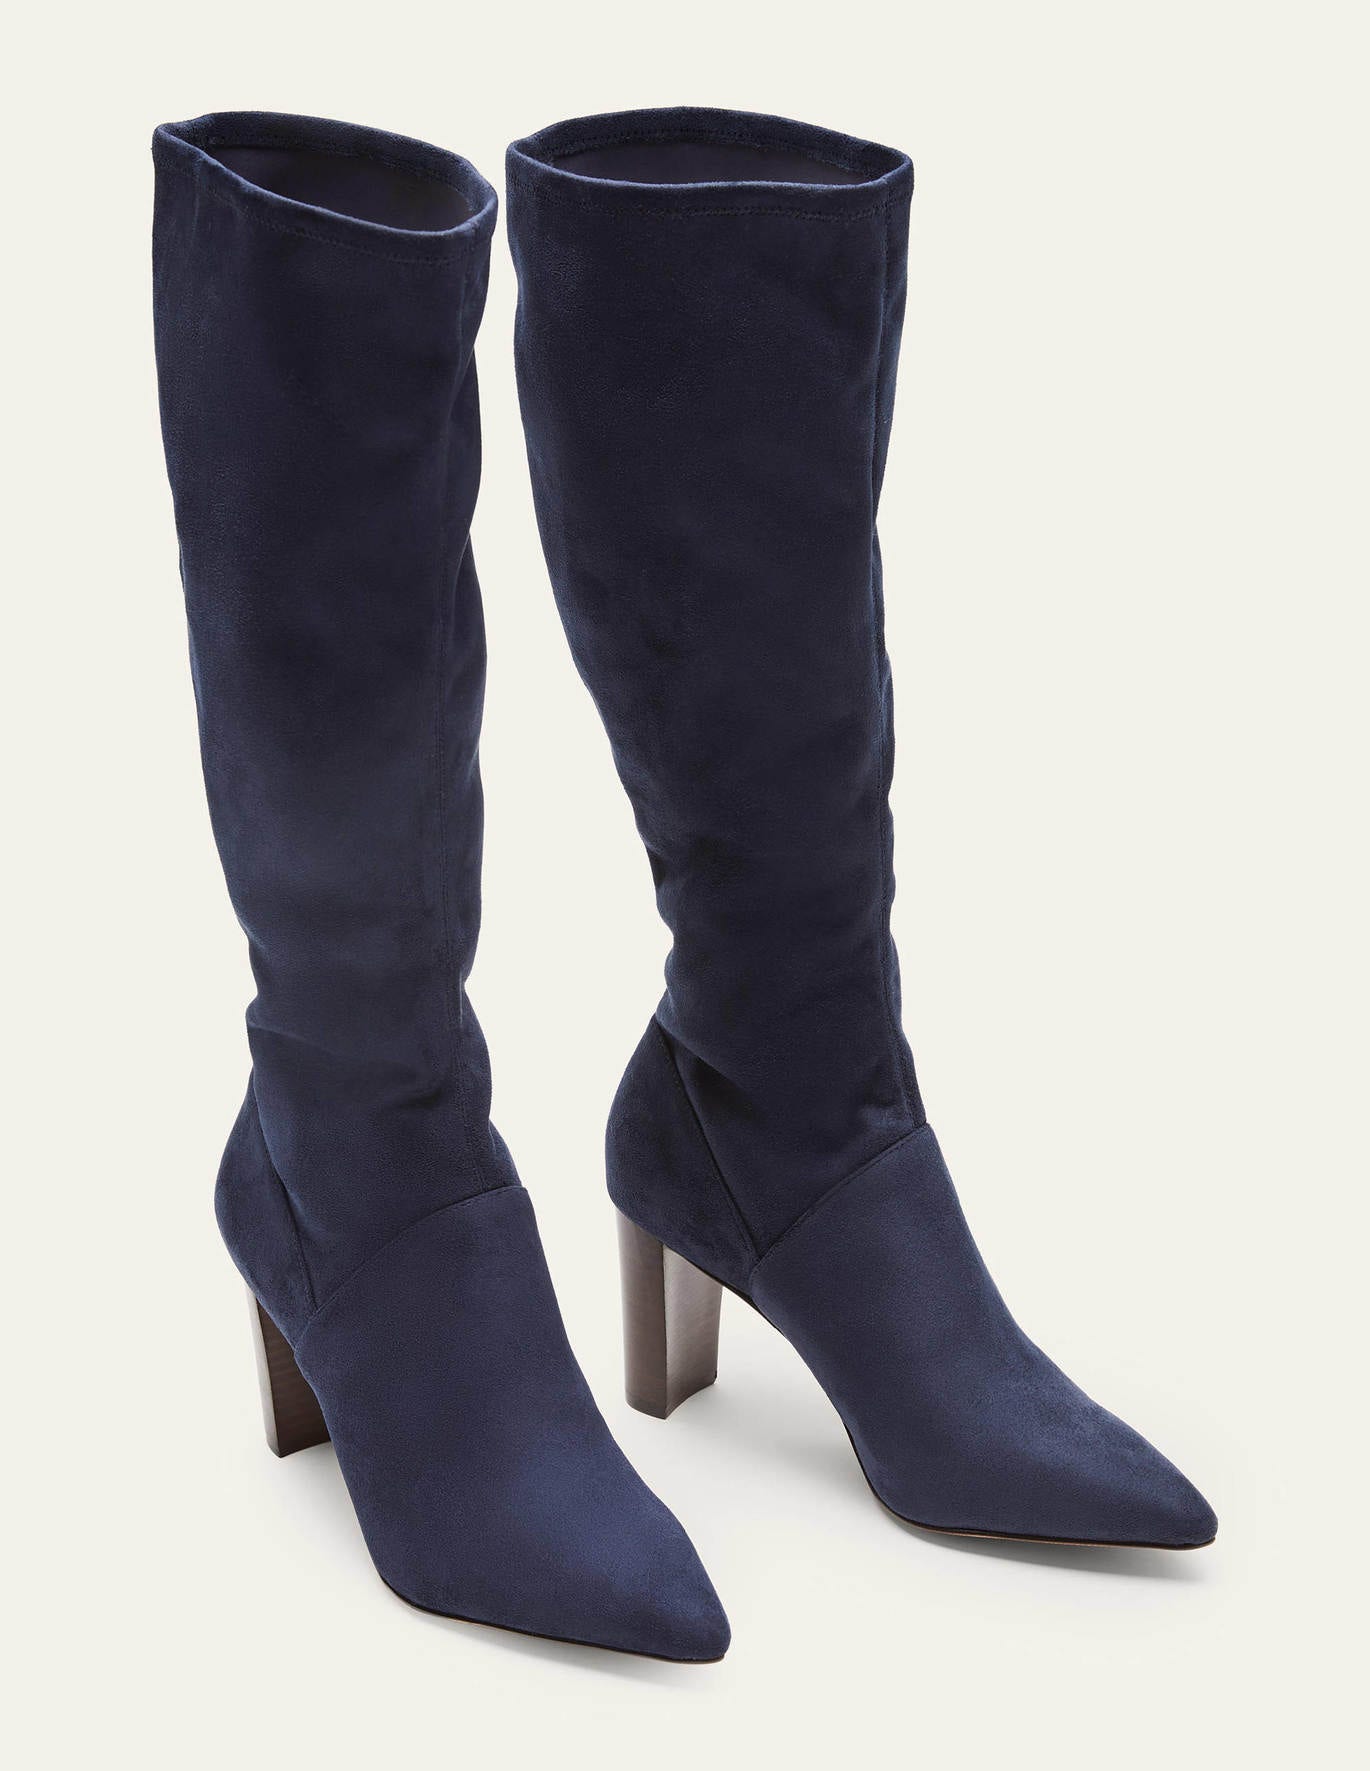 Boden Pointed Toe Stretch Boots - Navy